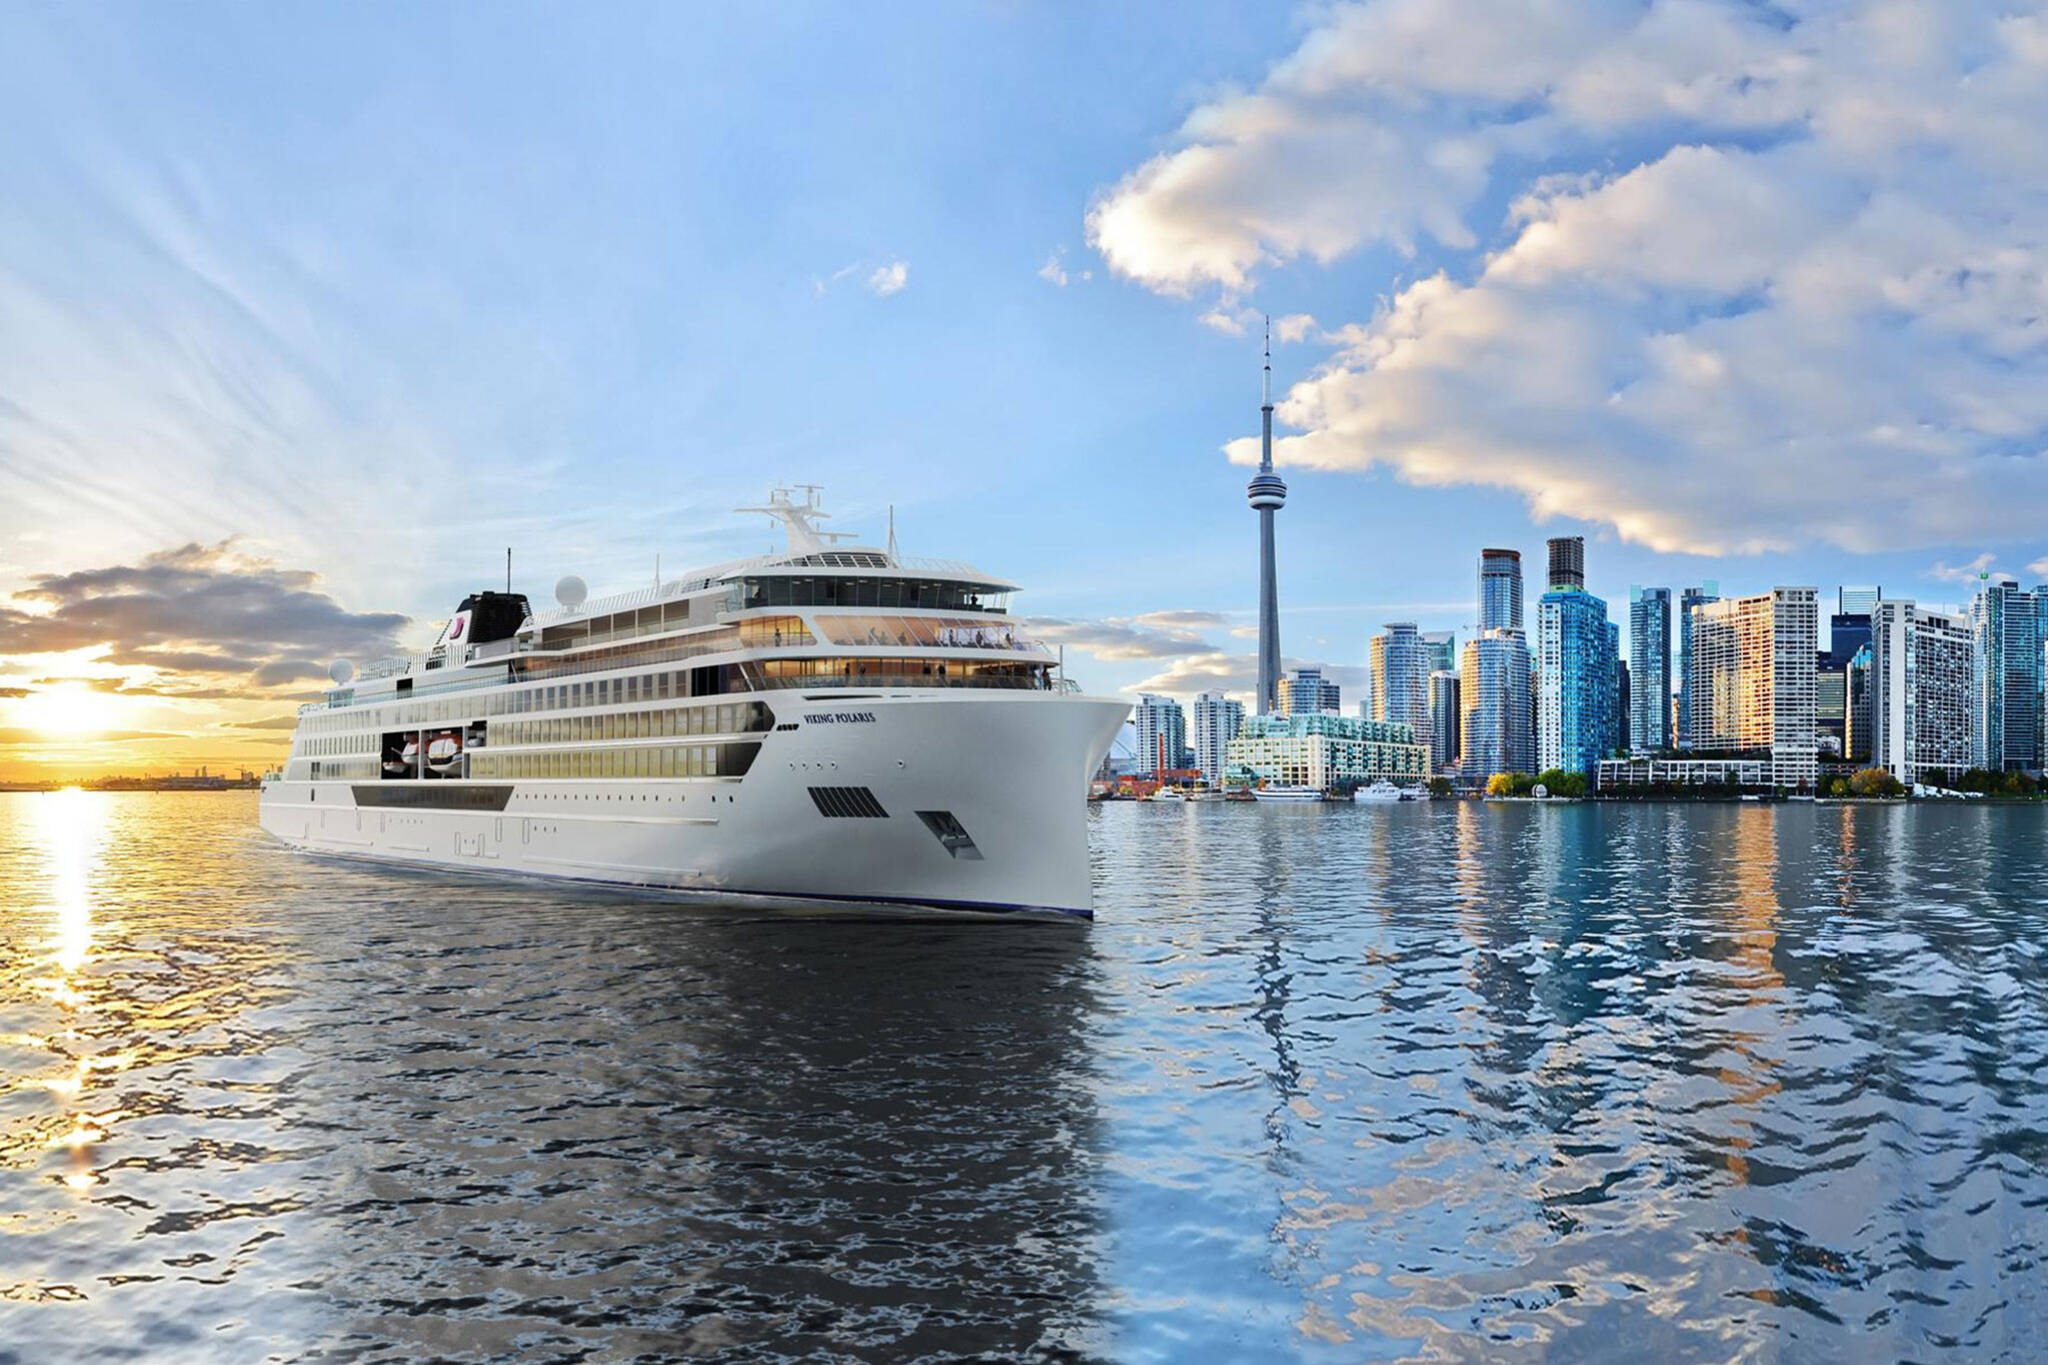 You can ride a cruise ship from Toronto that will take you all over the